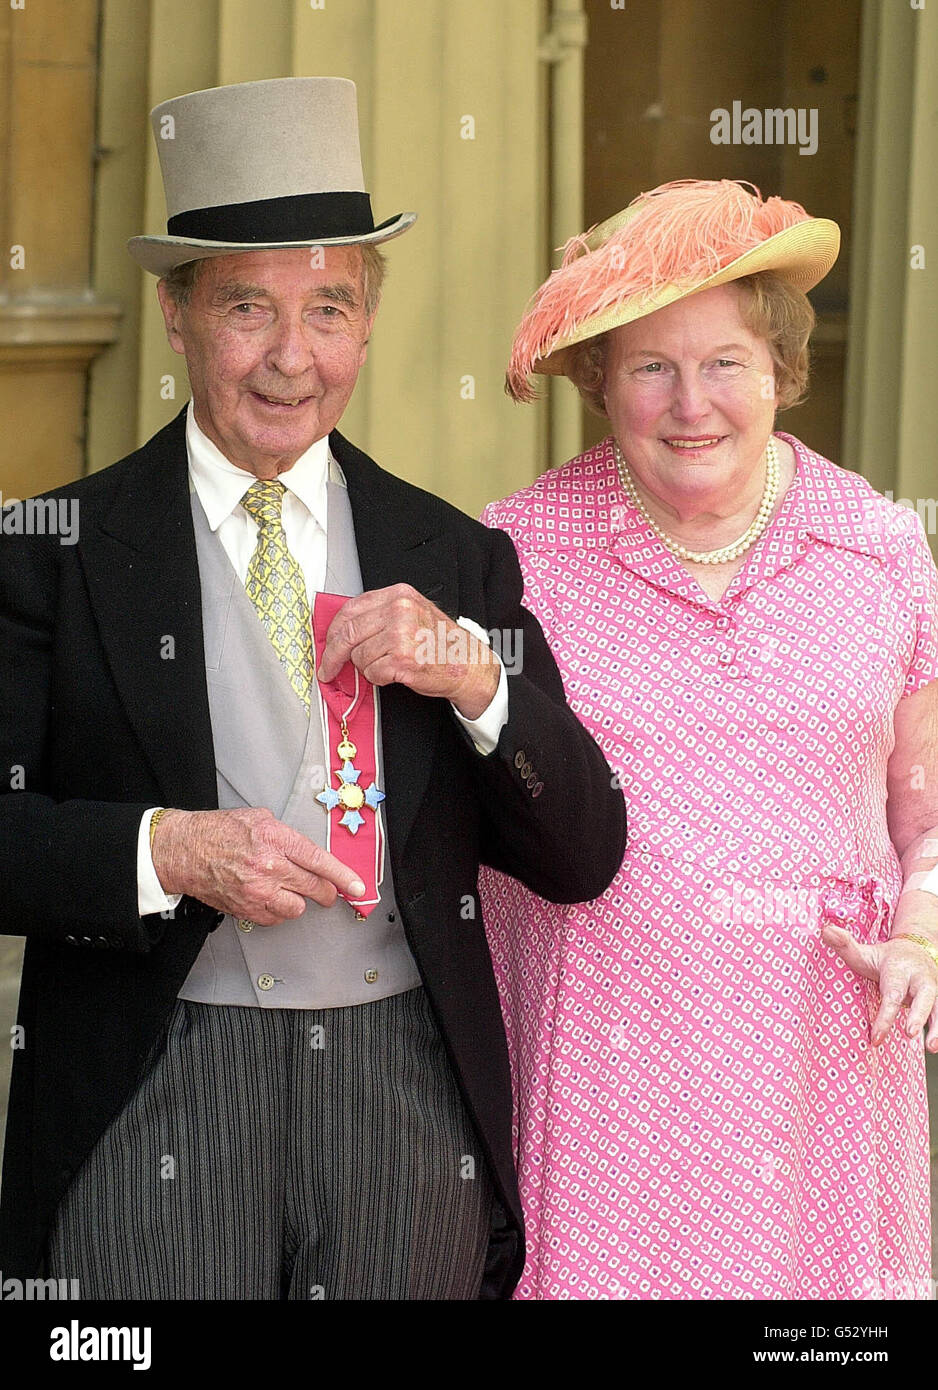 Author And Former Jockey Dick Francis And Wife Mary After He Received